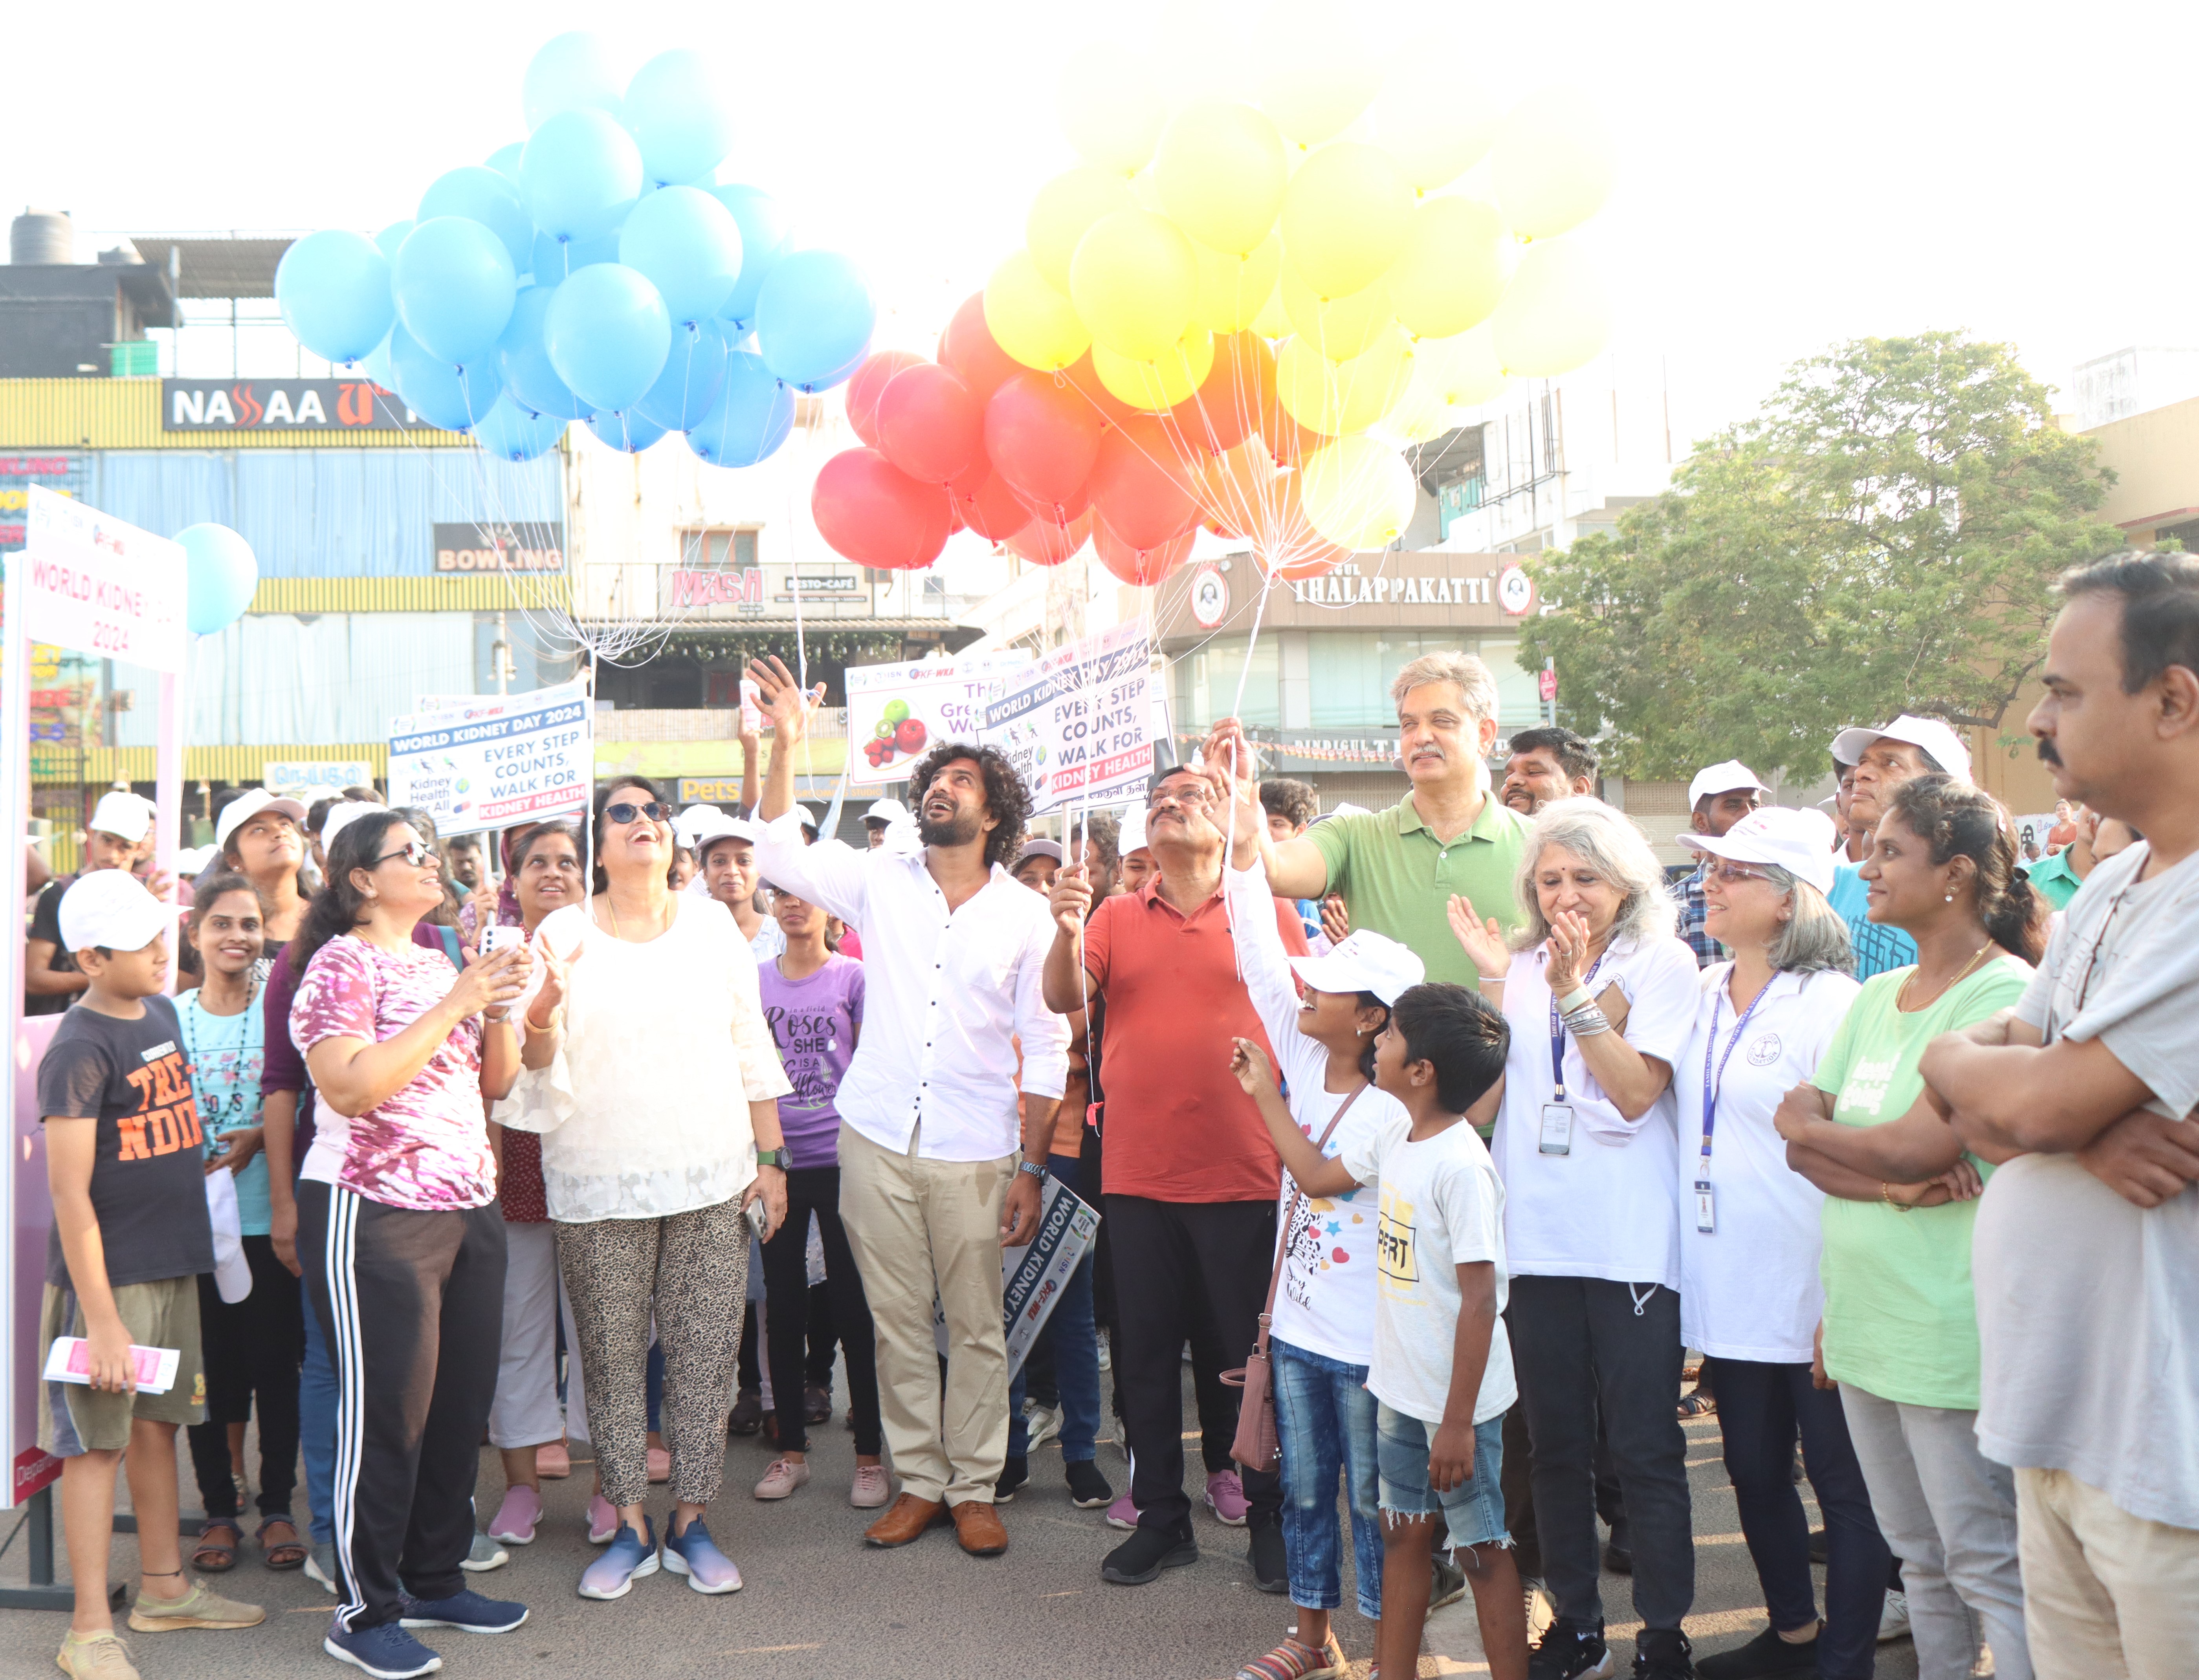 Dr Mehta’s Hospitals Organised a Walkathon to Raise Awareness about Kidney Health